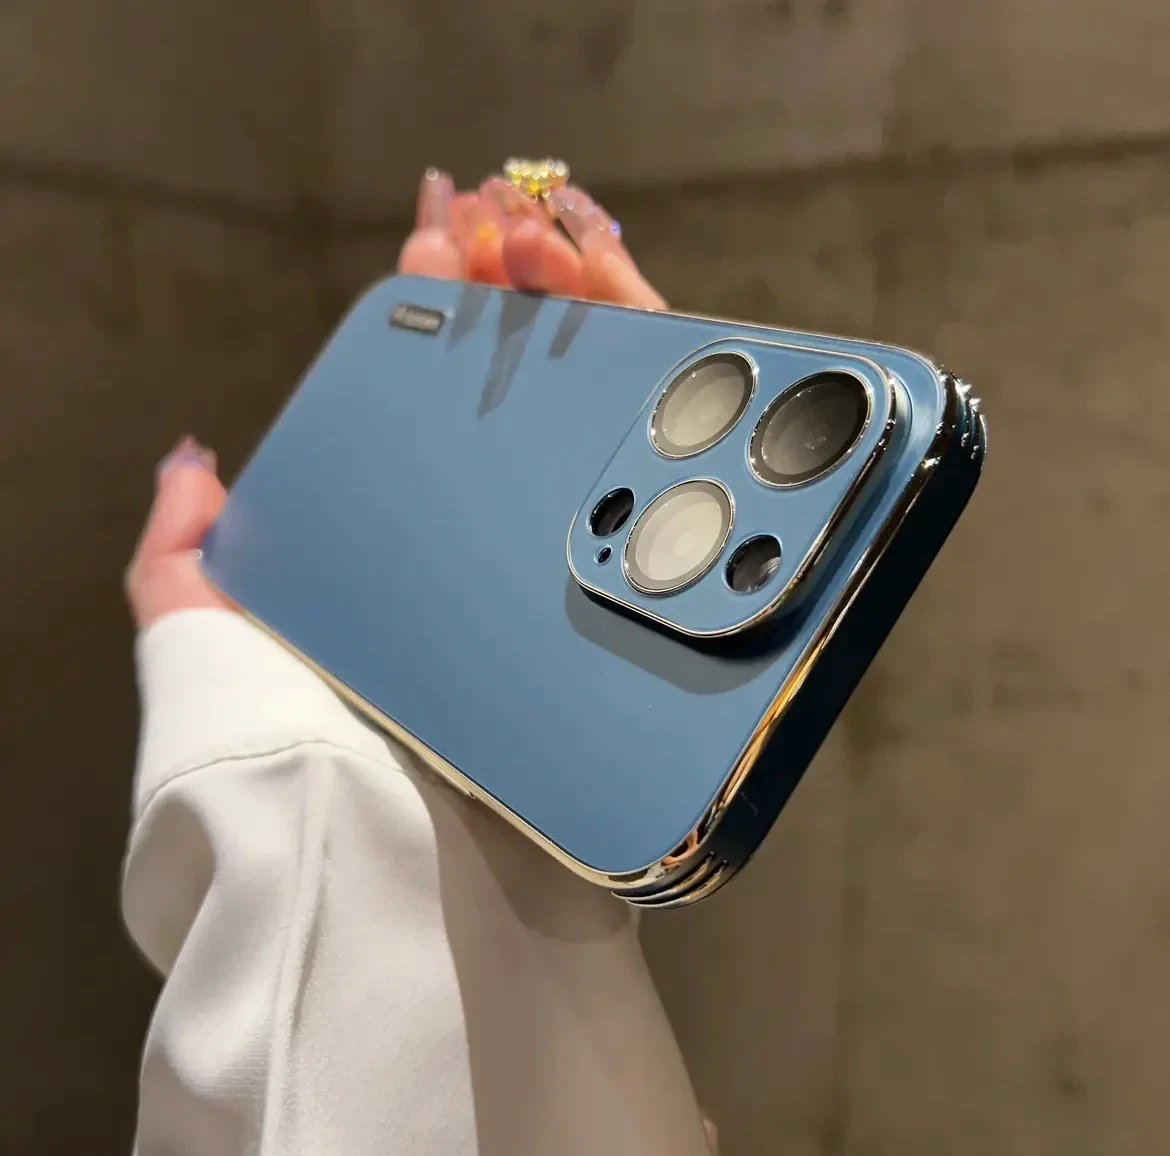 PC Drop-Proof IPhone Case With Camera Lens Protector [Logo Optional], Model: iPhone 14 Pro Max, Color: Navy Blue